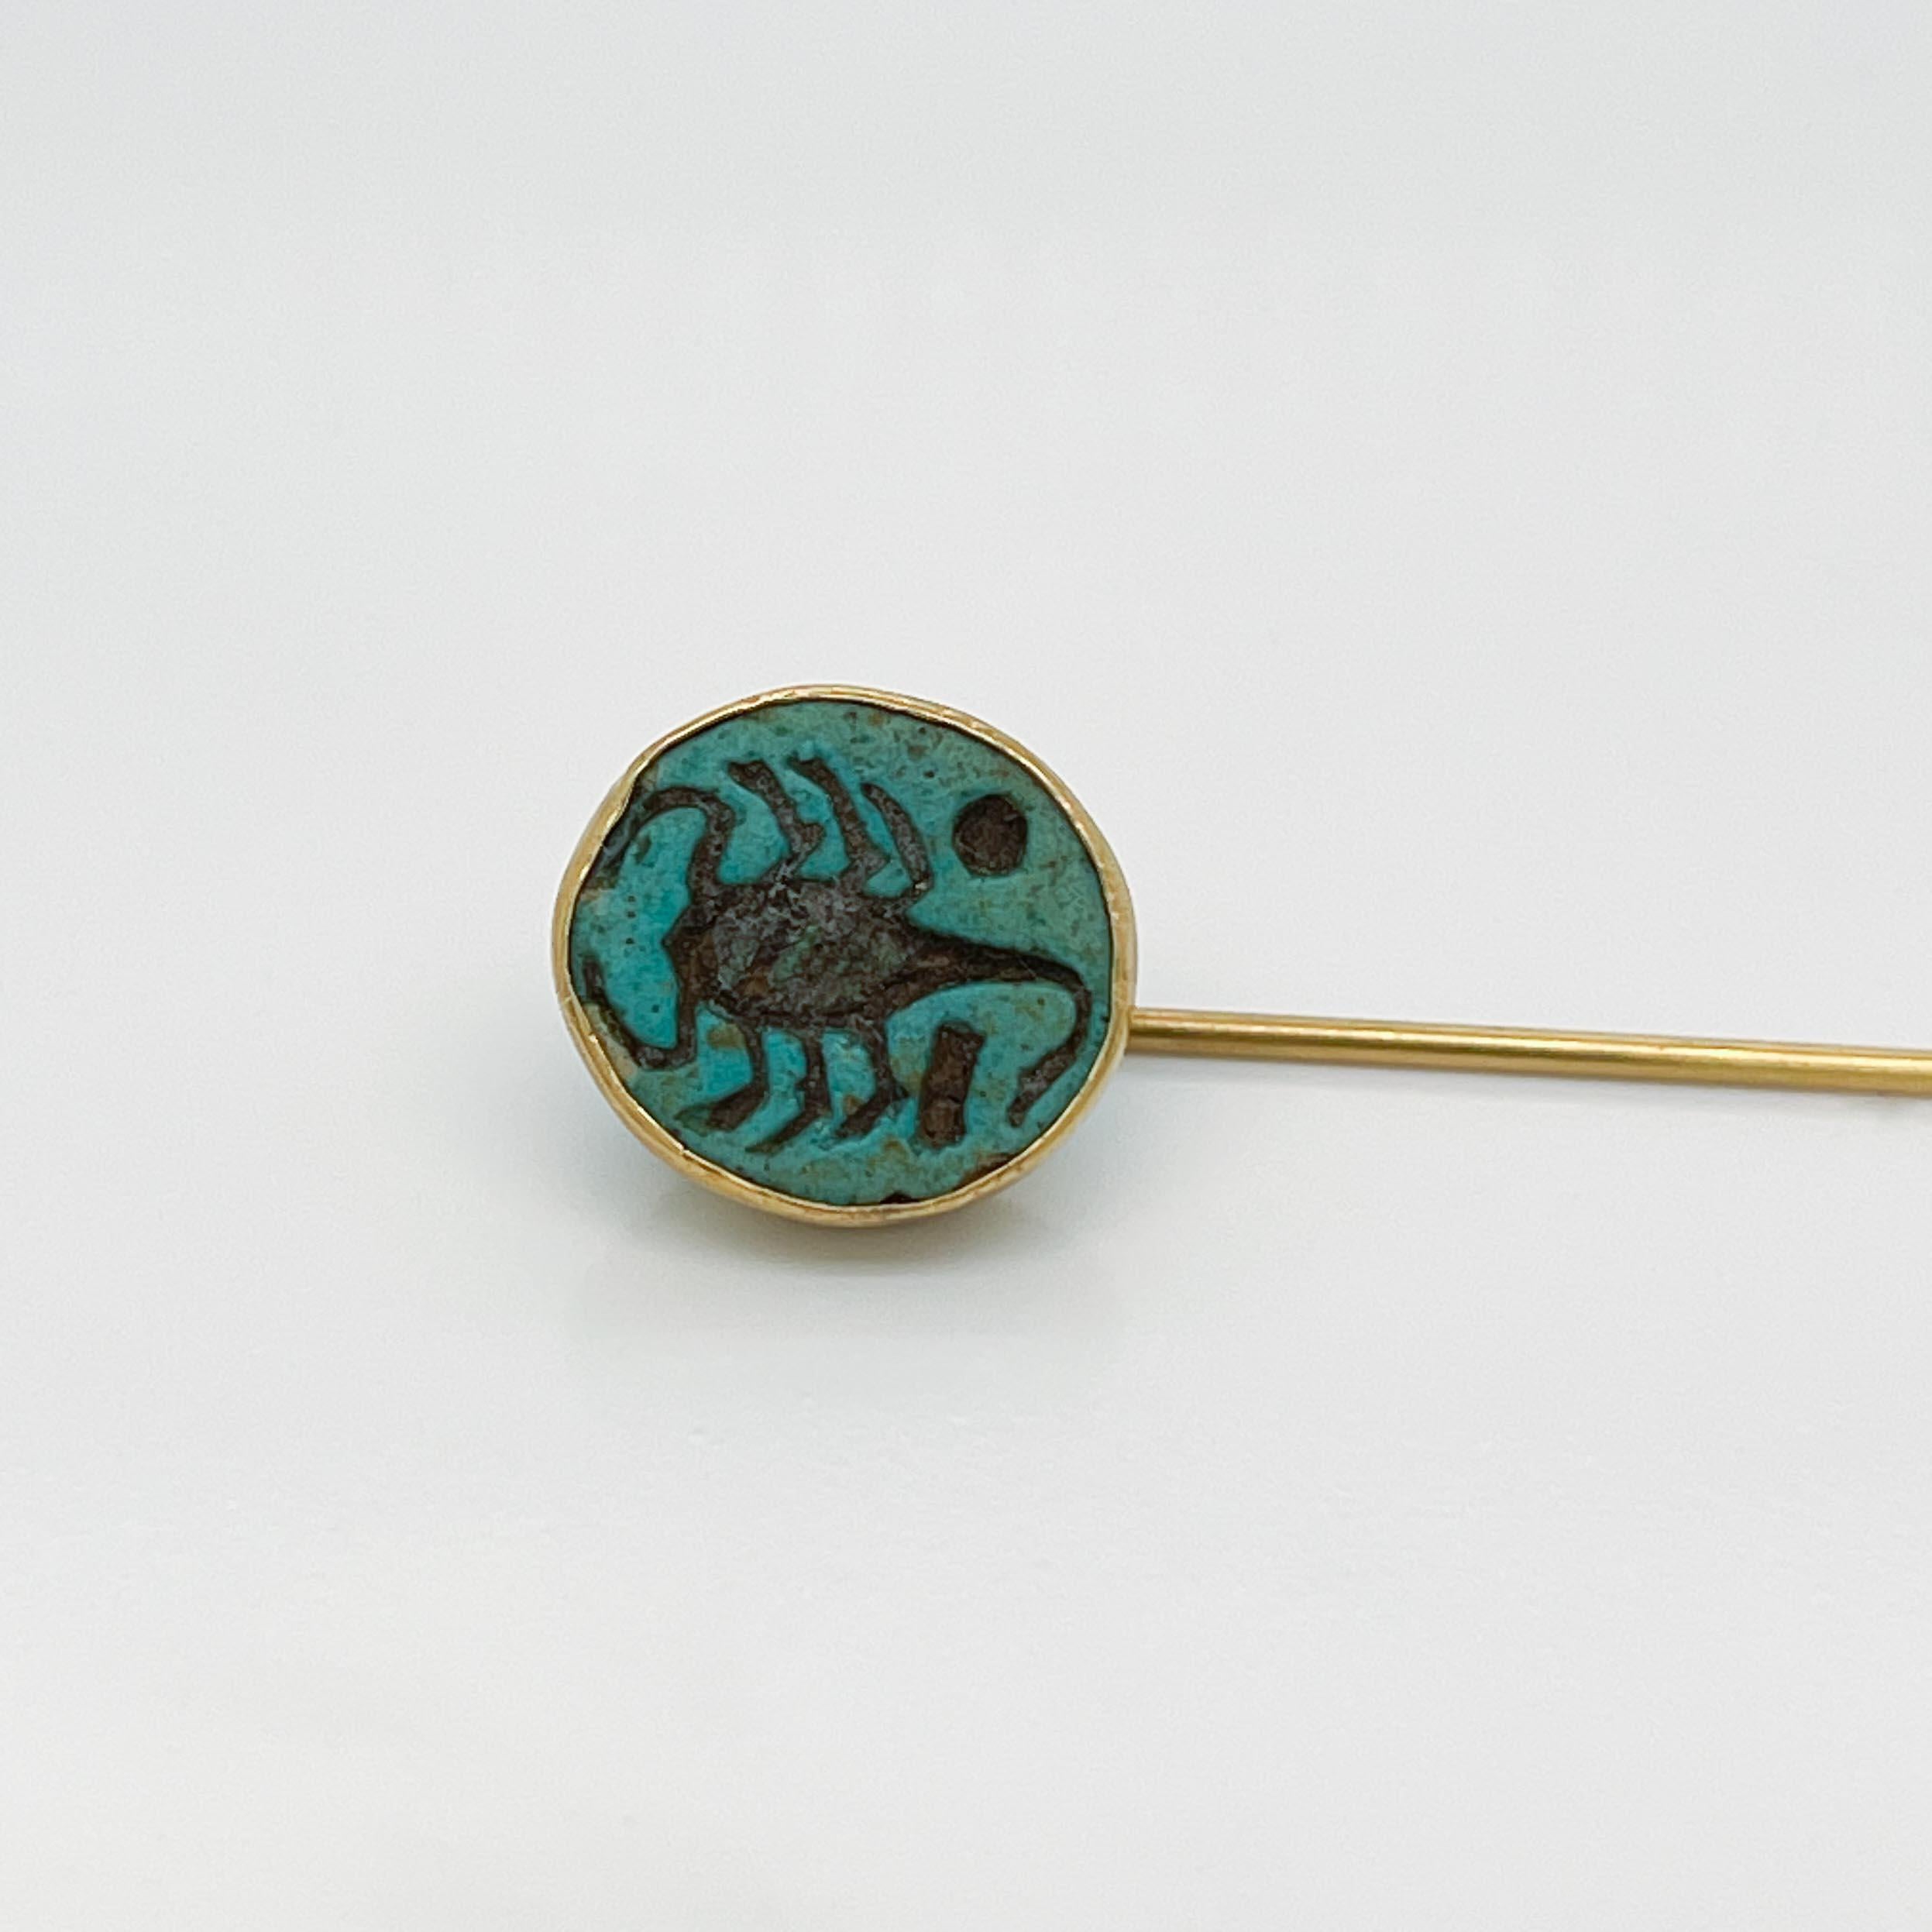 Antique Egyptian Revival 14K Gold & Faience Scorpion Stick Pin 2